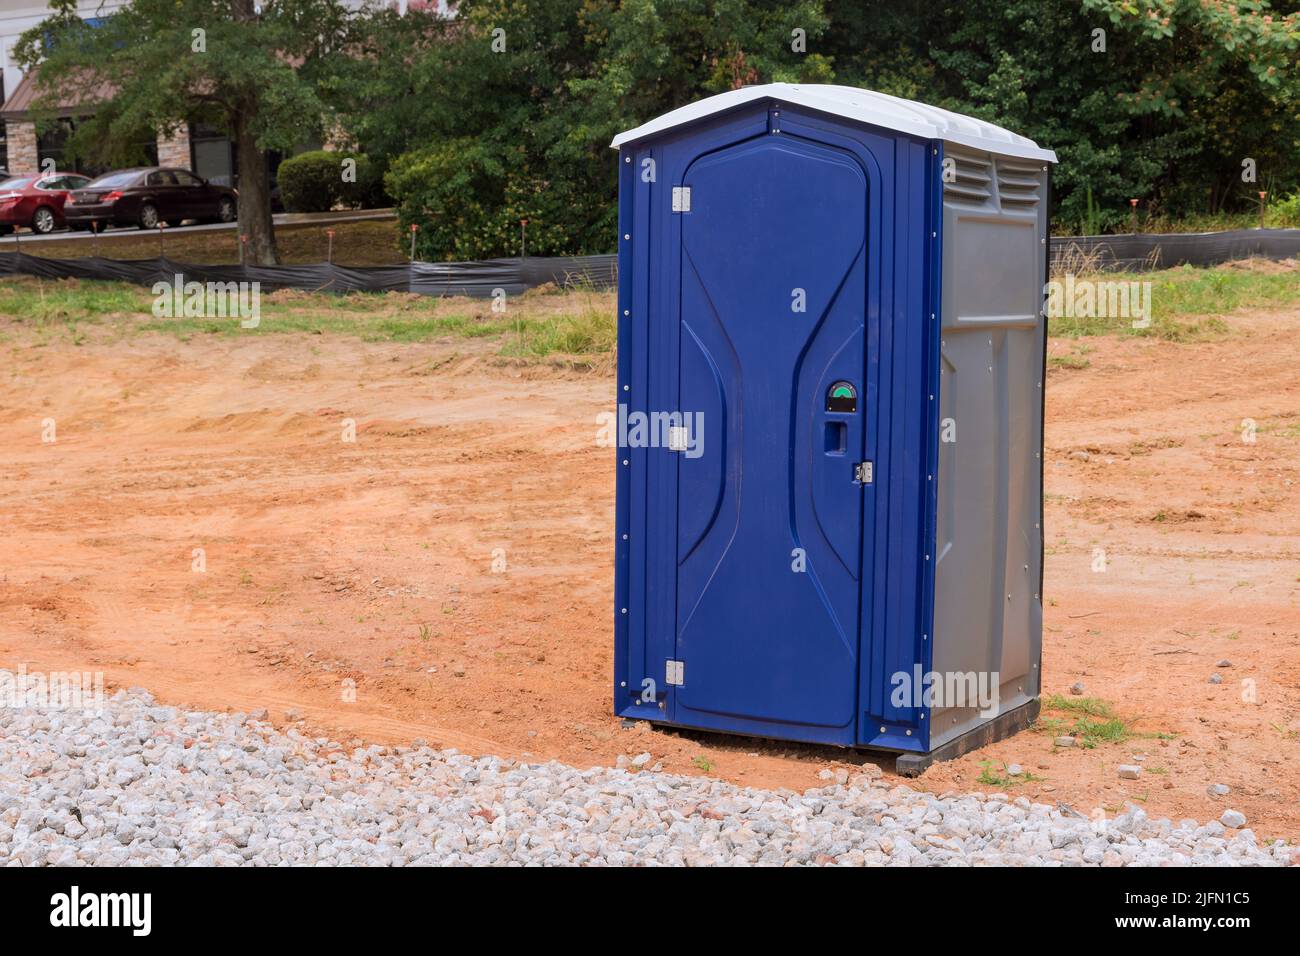 Workers using a portable restroom near on a construction site Stock Photo